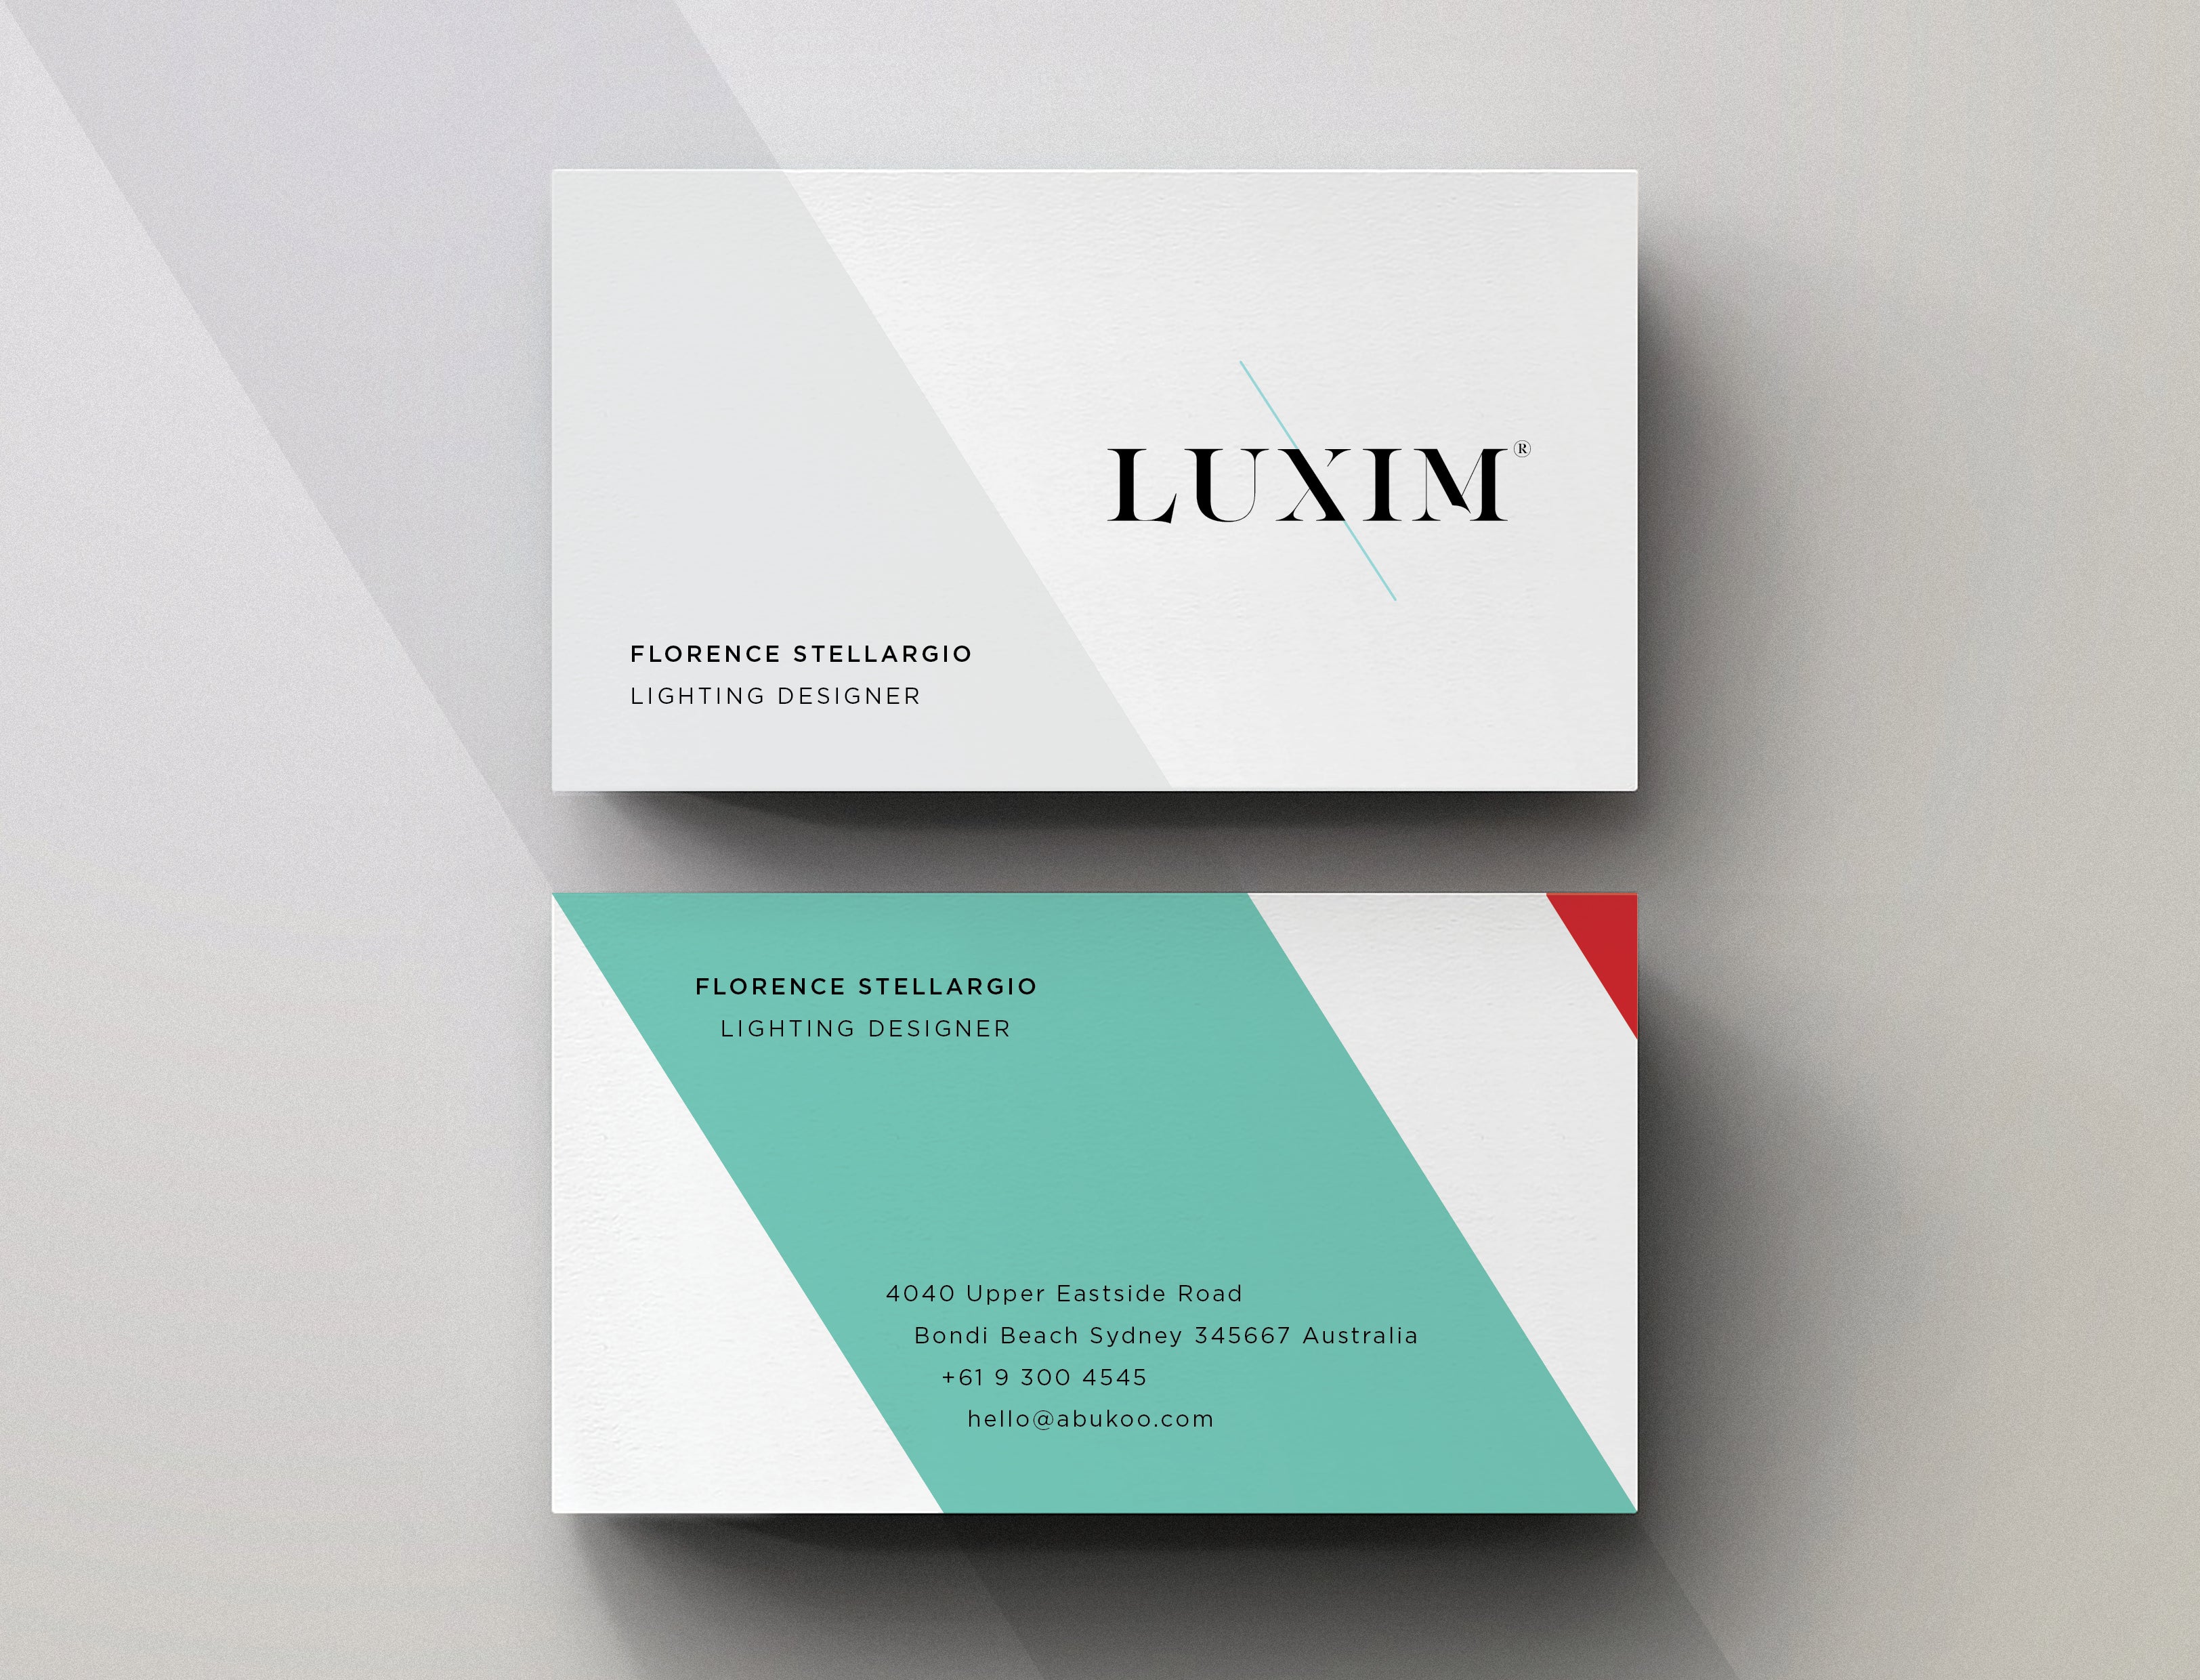 Minimal Business Card Design for LUXIM